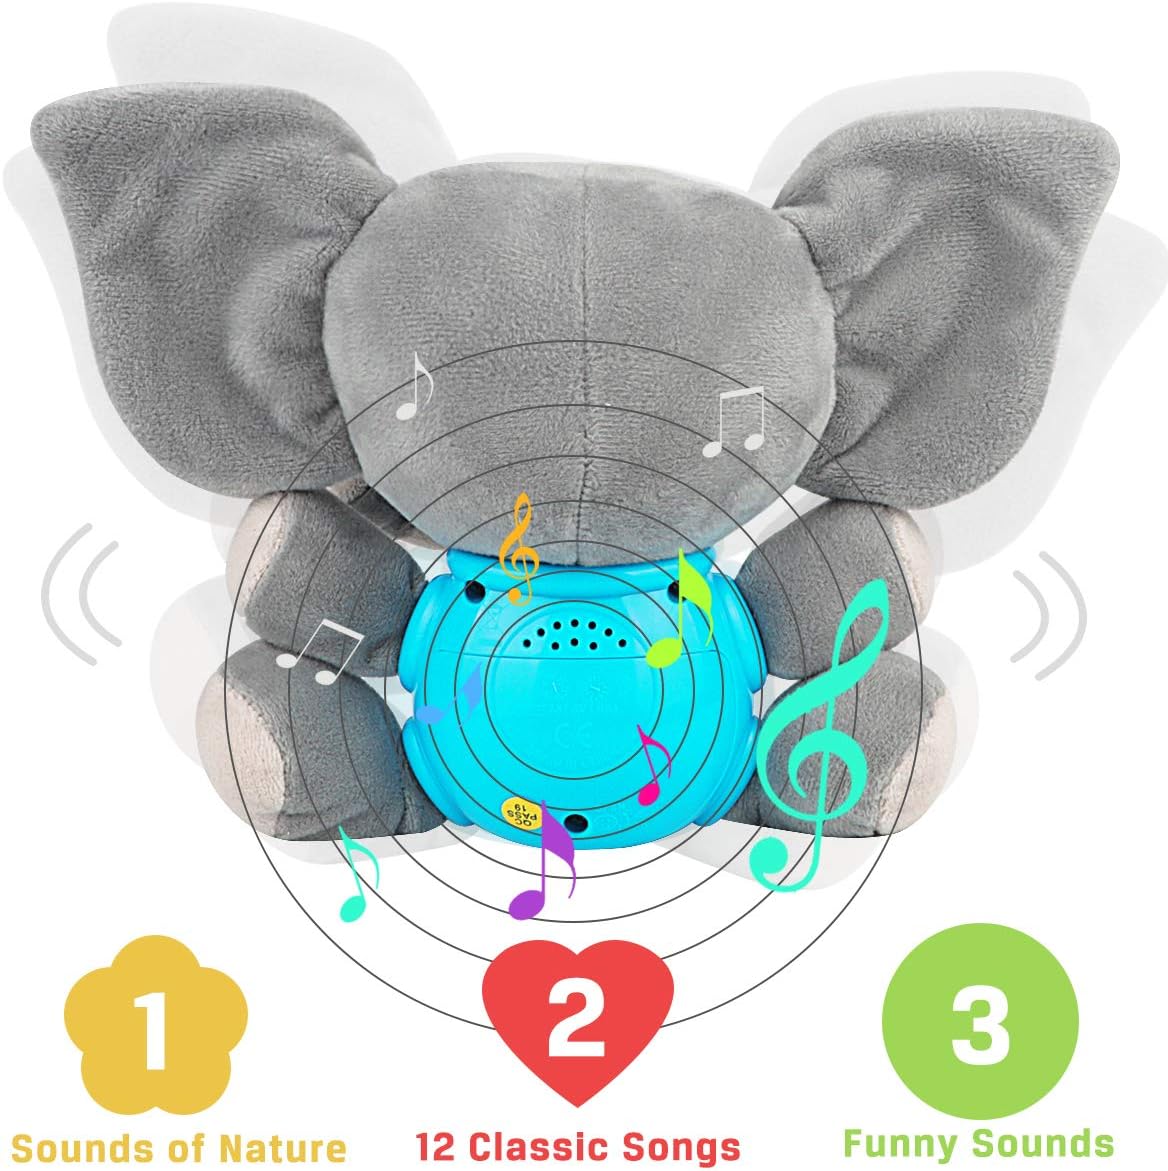 Aitbay Plush Elephant Music Baby Toys 0 3 6 9 12 Months, Cute Stuffed Aminal Light Up Baby Toys Newborn Baby Musical Toys for Infant Babies Boys & Girls Toddlers 0 to 36 Months (Gray)